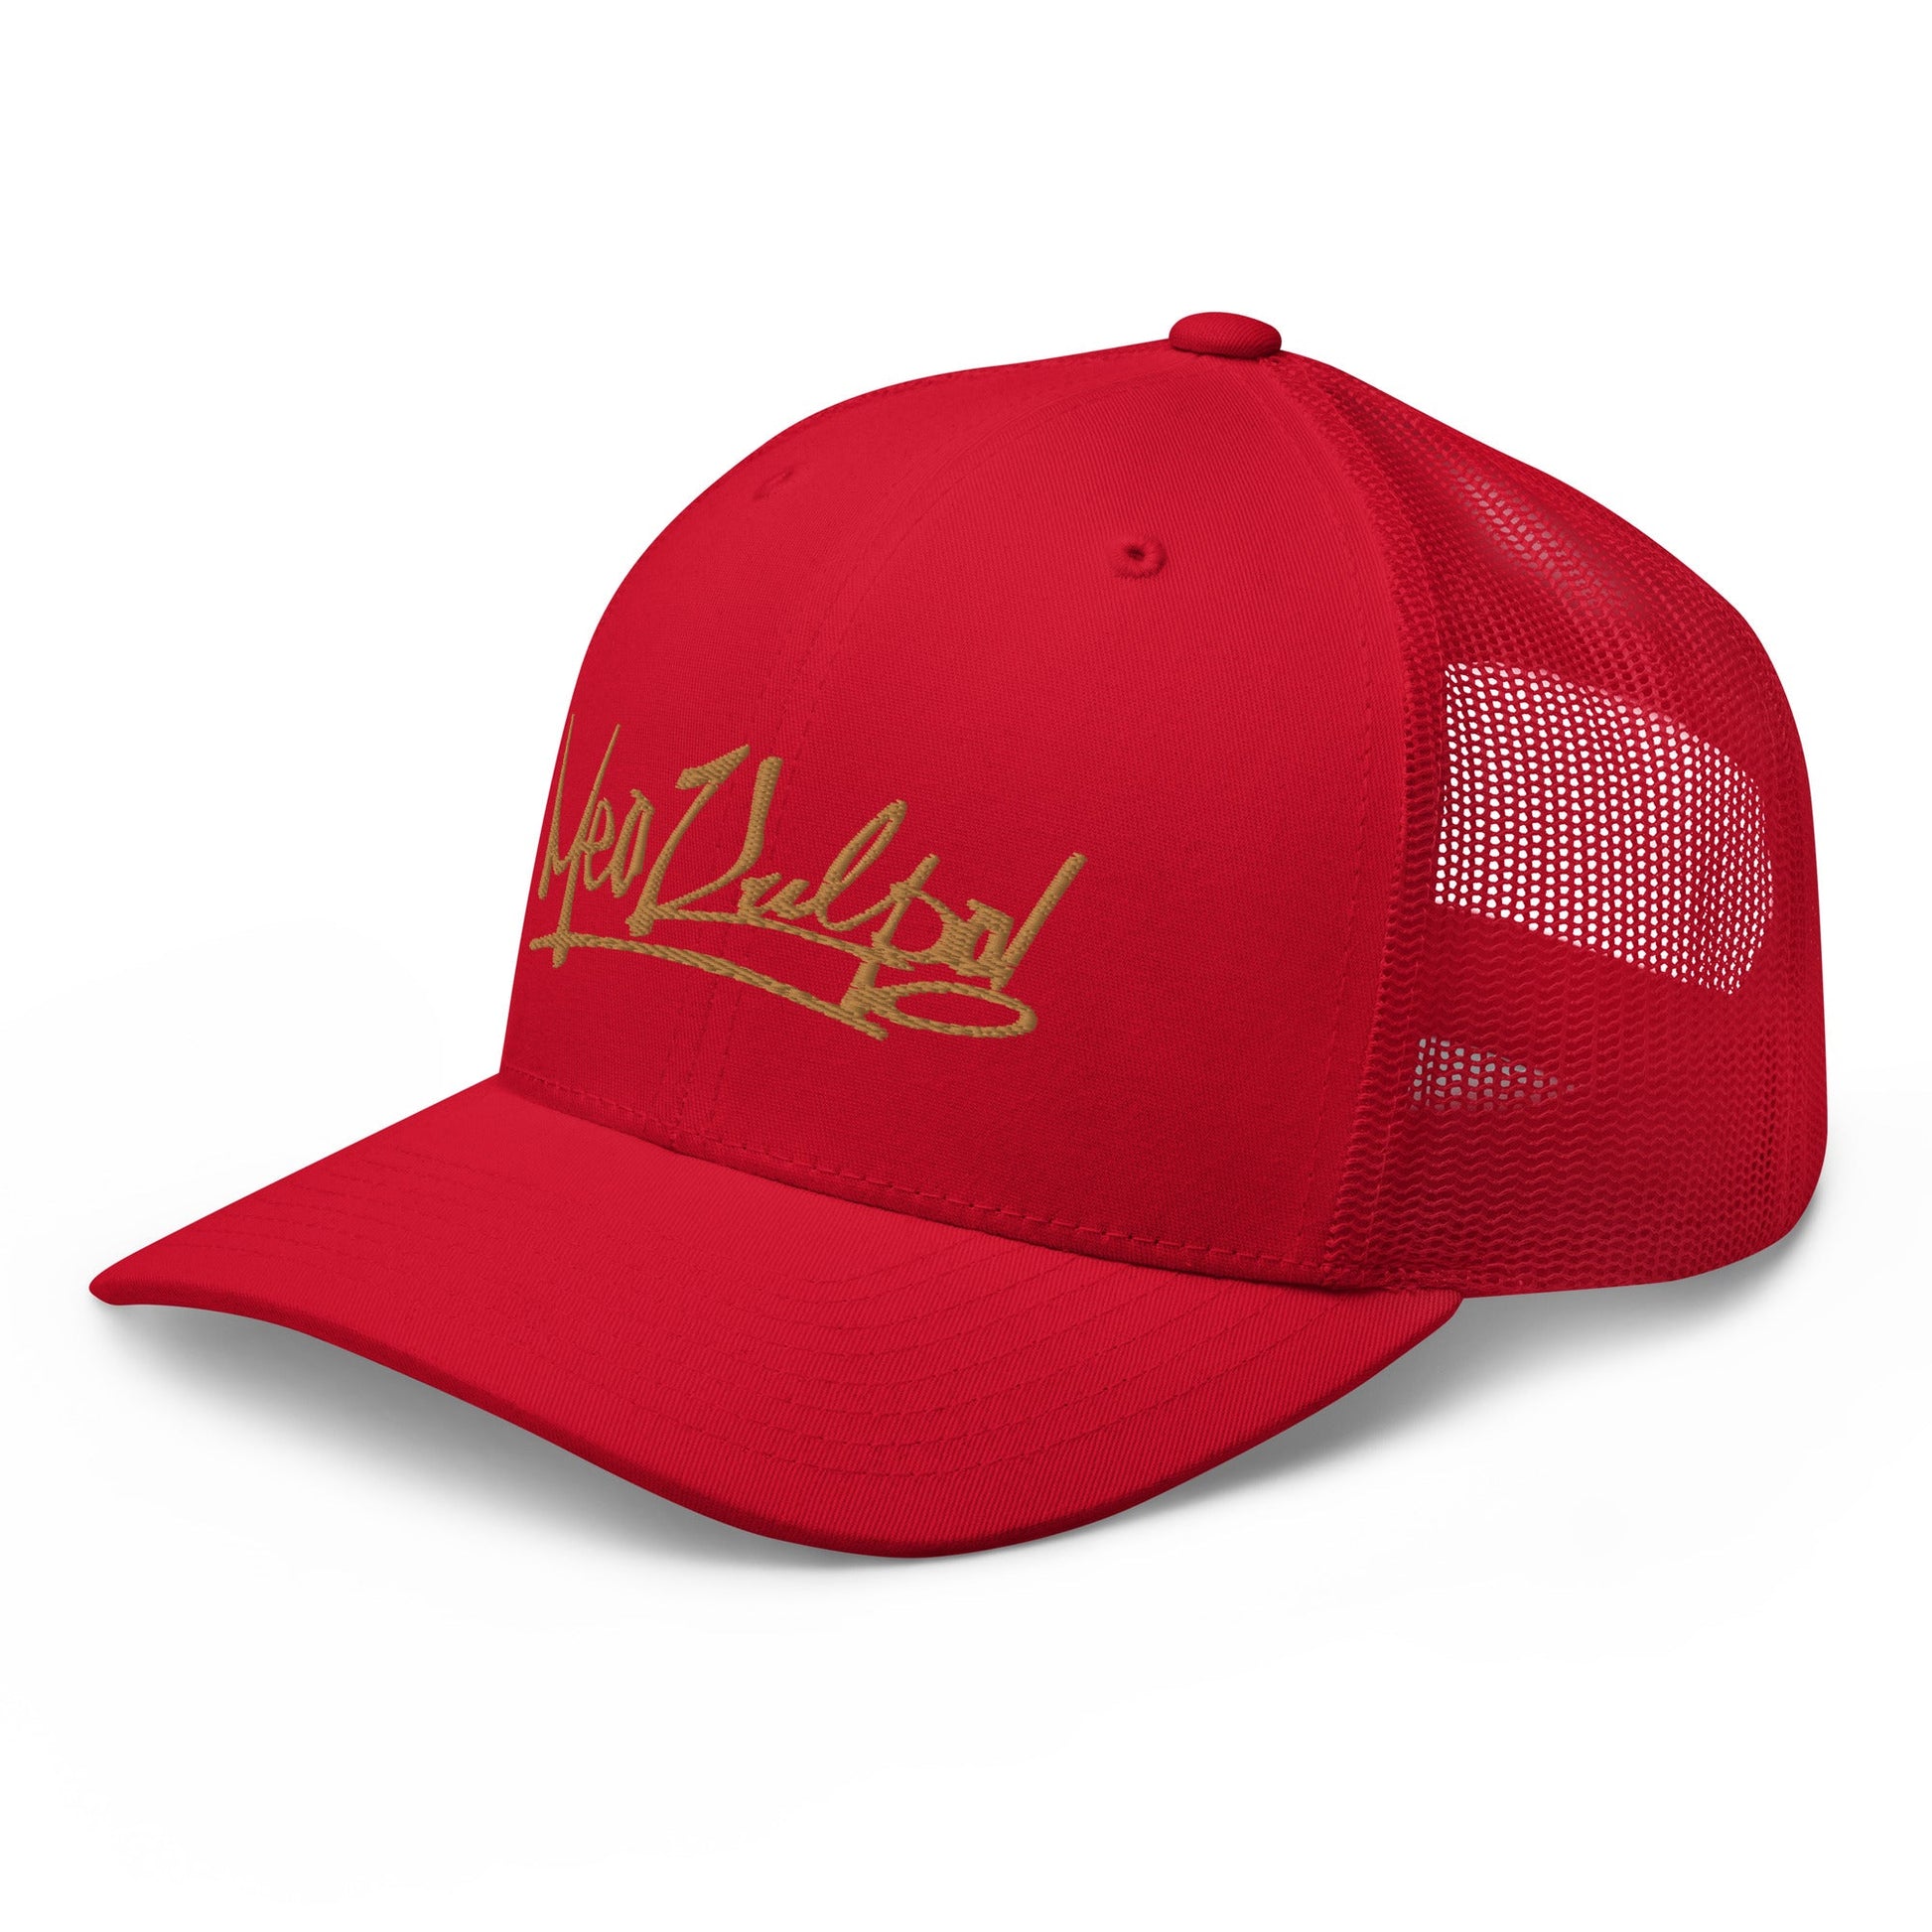 Side Angle - MeaKulpa Red Trucker Cap in Gold Splendor Capture the allure of the MeaKulpa Red Trucker Cap from a side angle. The gold-embodied logo shines against the vibrant red front, while the red mesh back adds a harmonious touch. Embrace sophistication with every turn